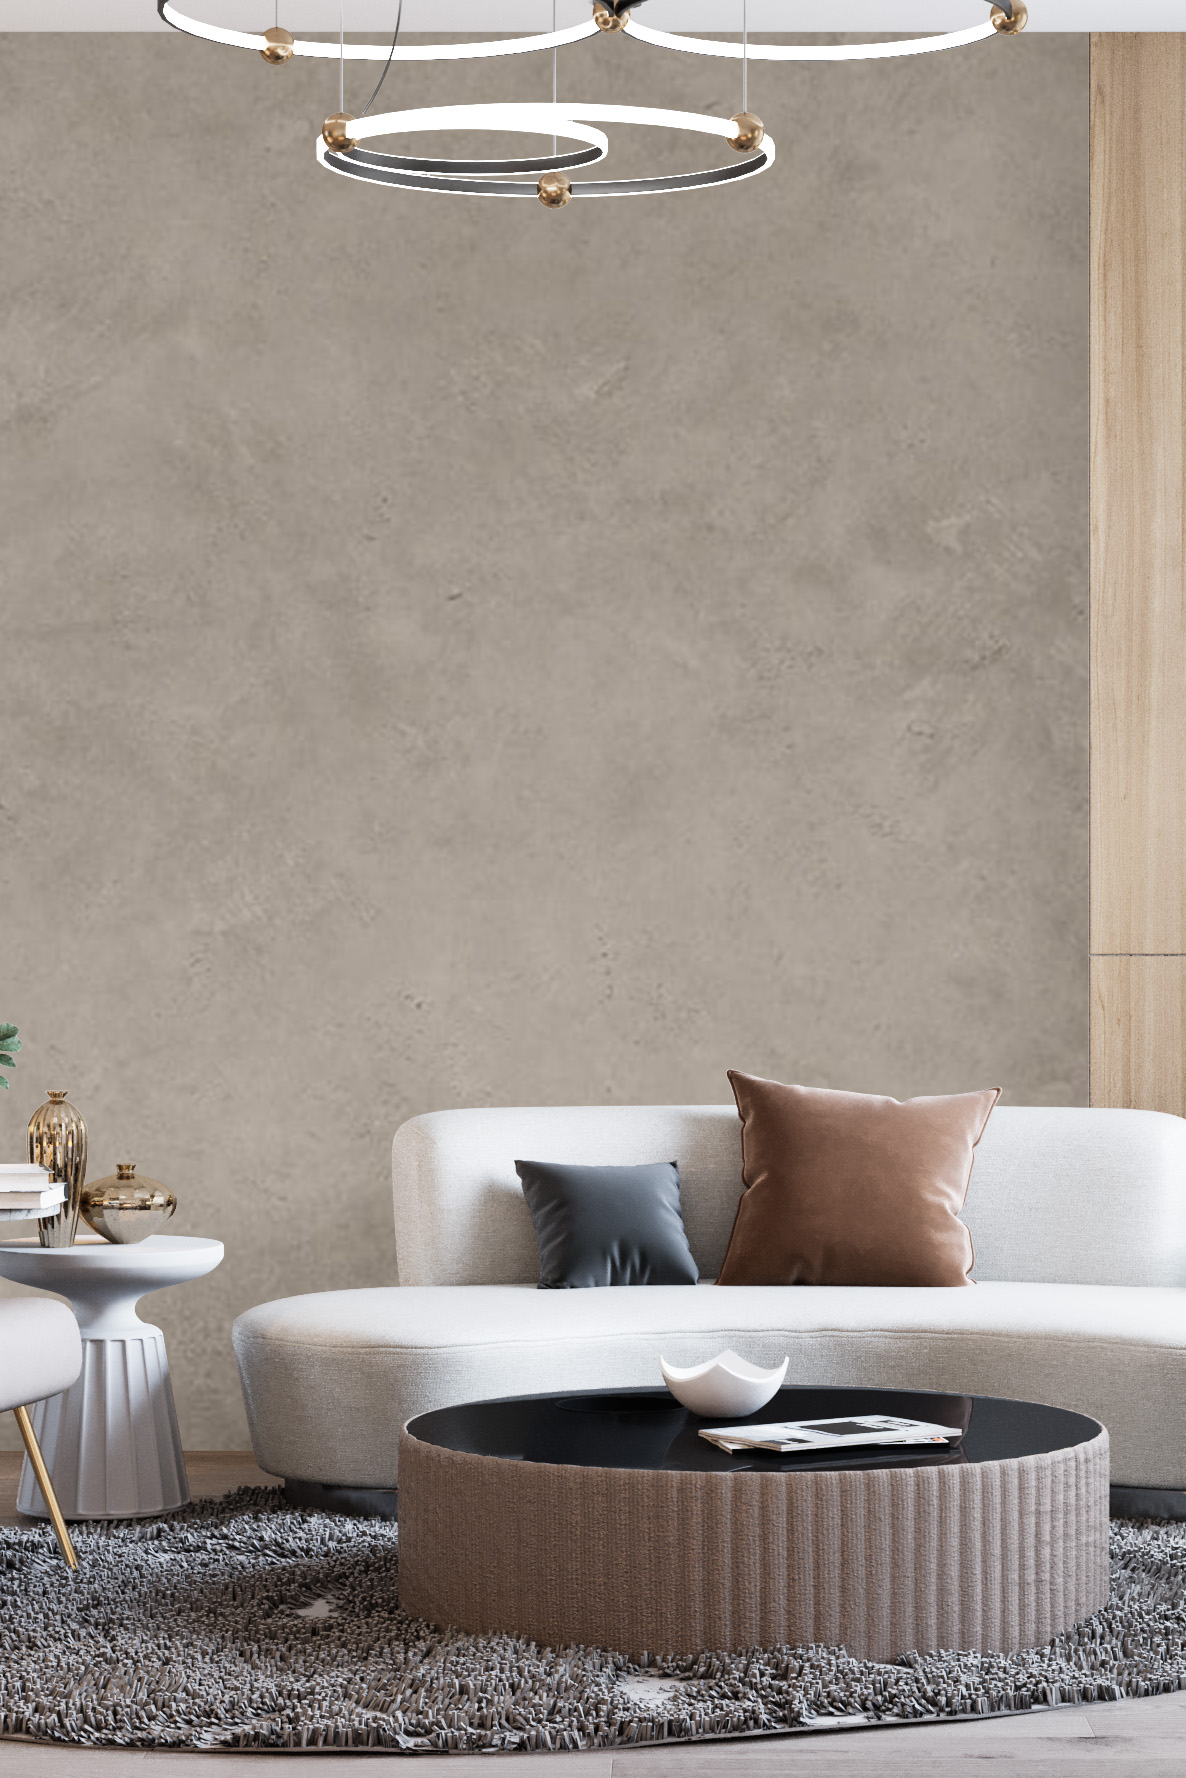 Textured plasters. Inter'єr in the style of "warm minimalism" Maxima-decor